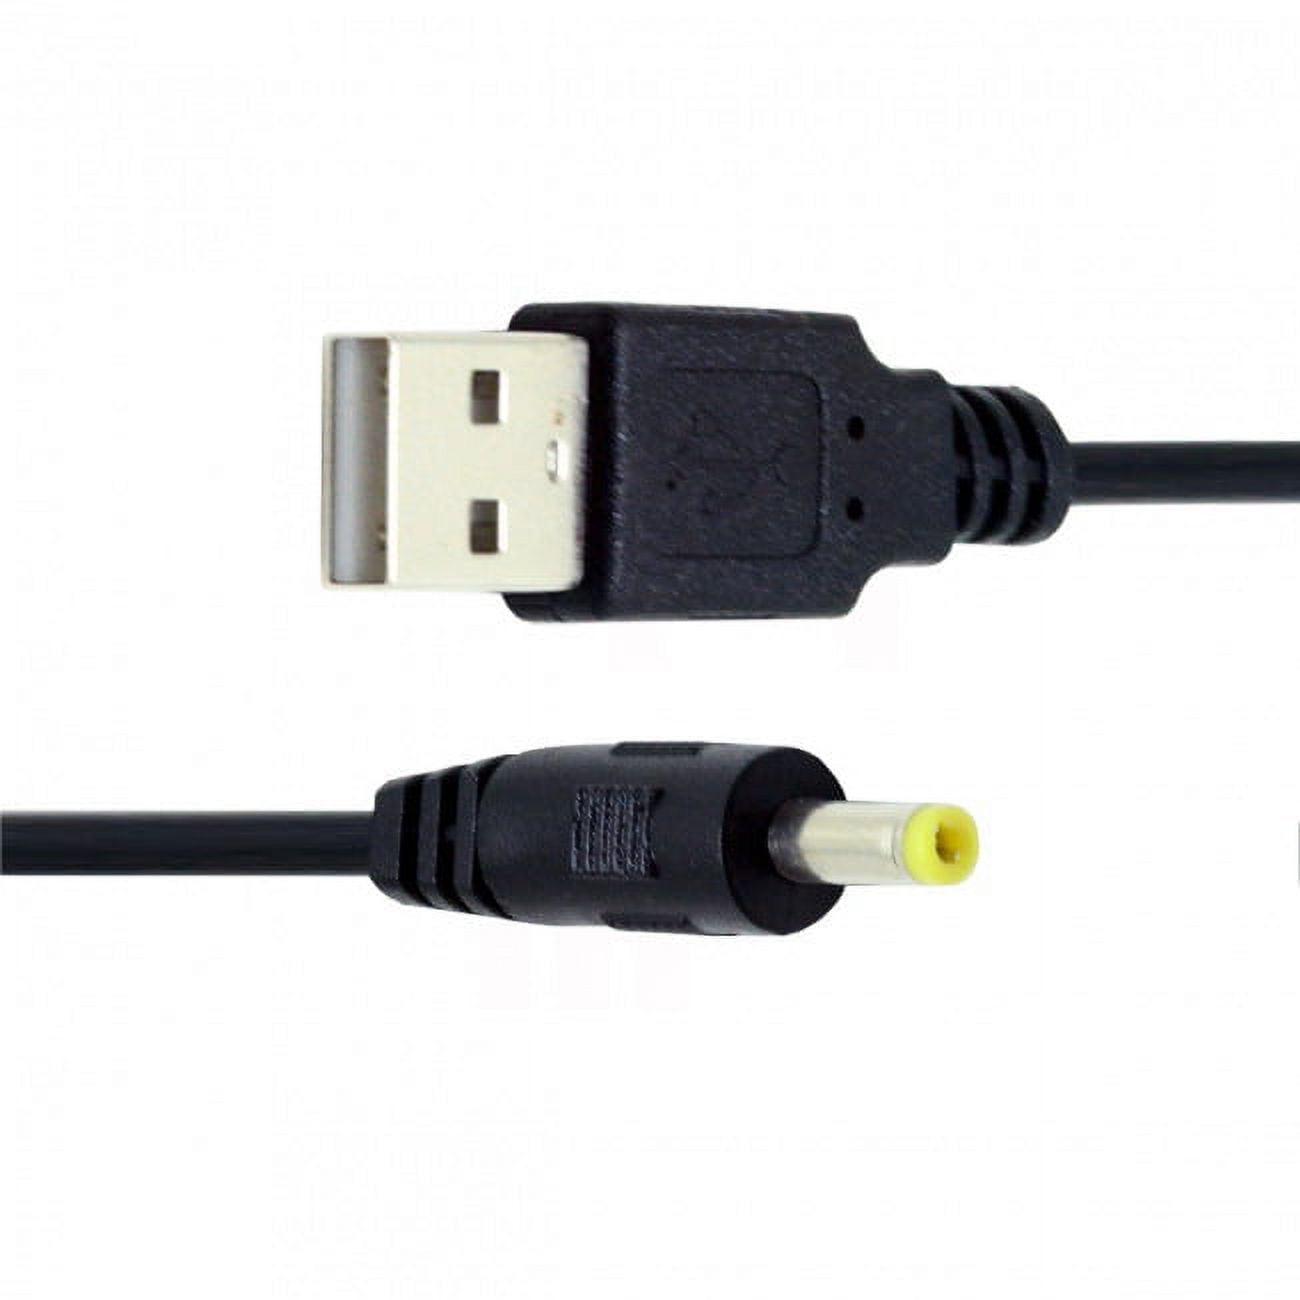 PRO SIGNAL - USB 2.0 A Male to 3.4mm Type H Barrel 5V DC Power